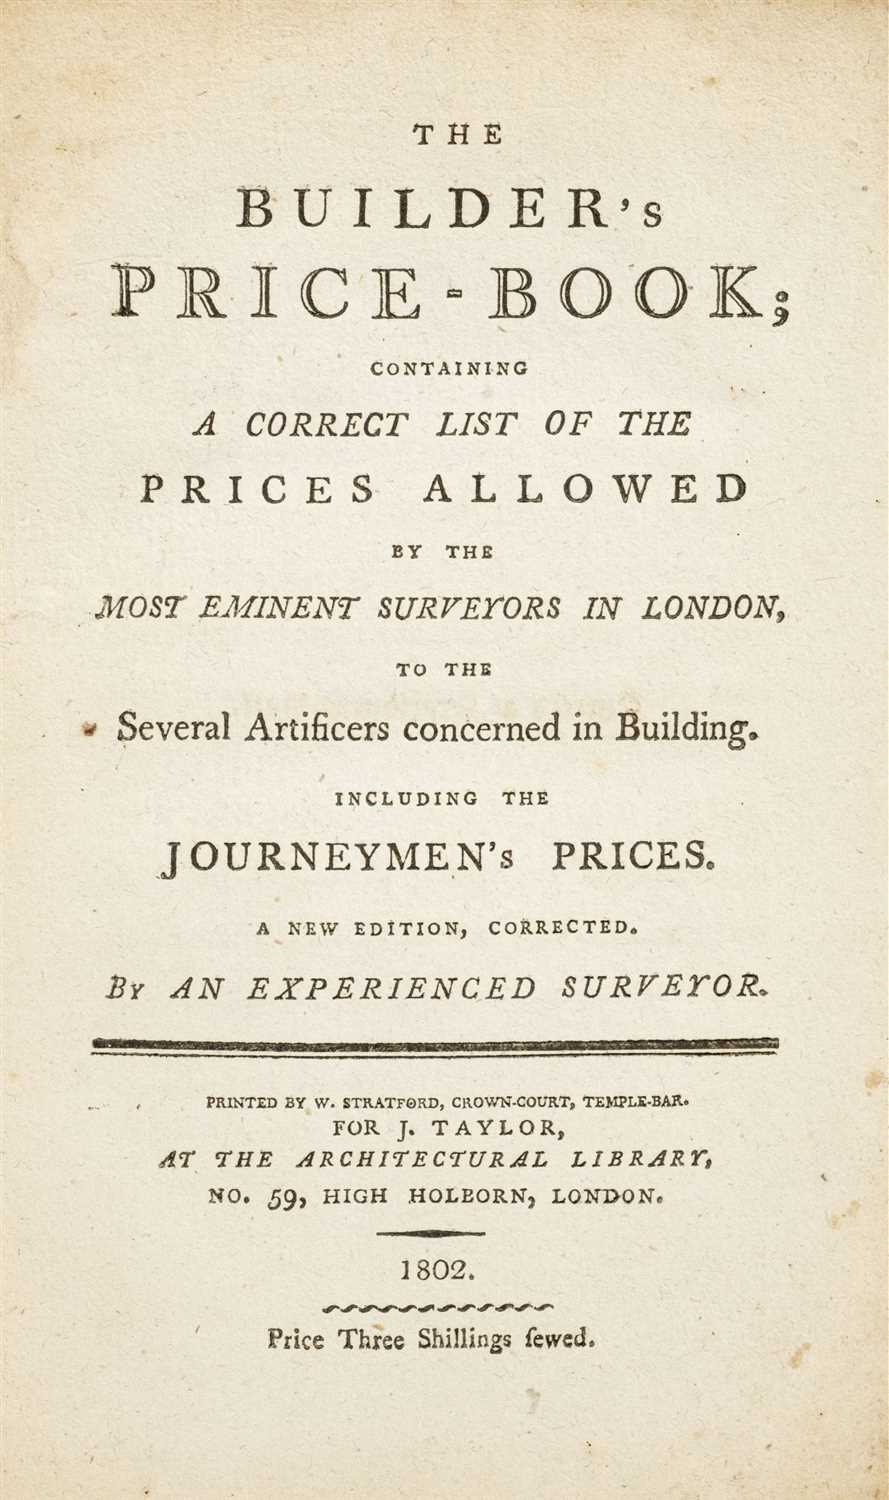 Lot 400 - Taylor (J., publisher). The Builder's Price-Book; 1802